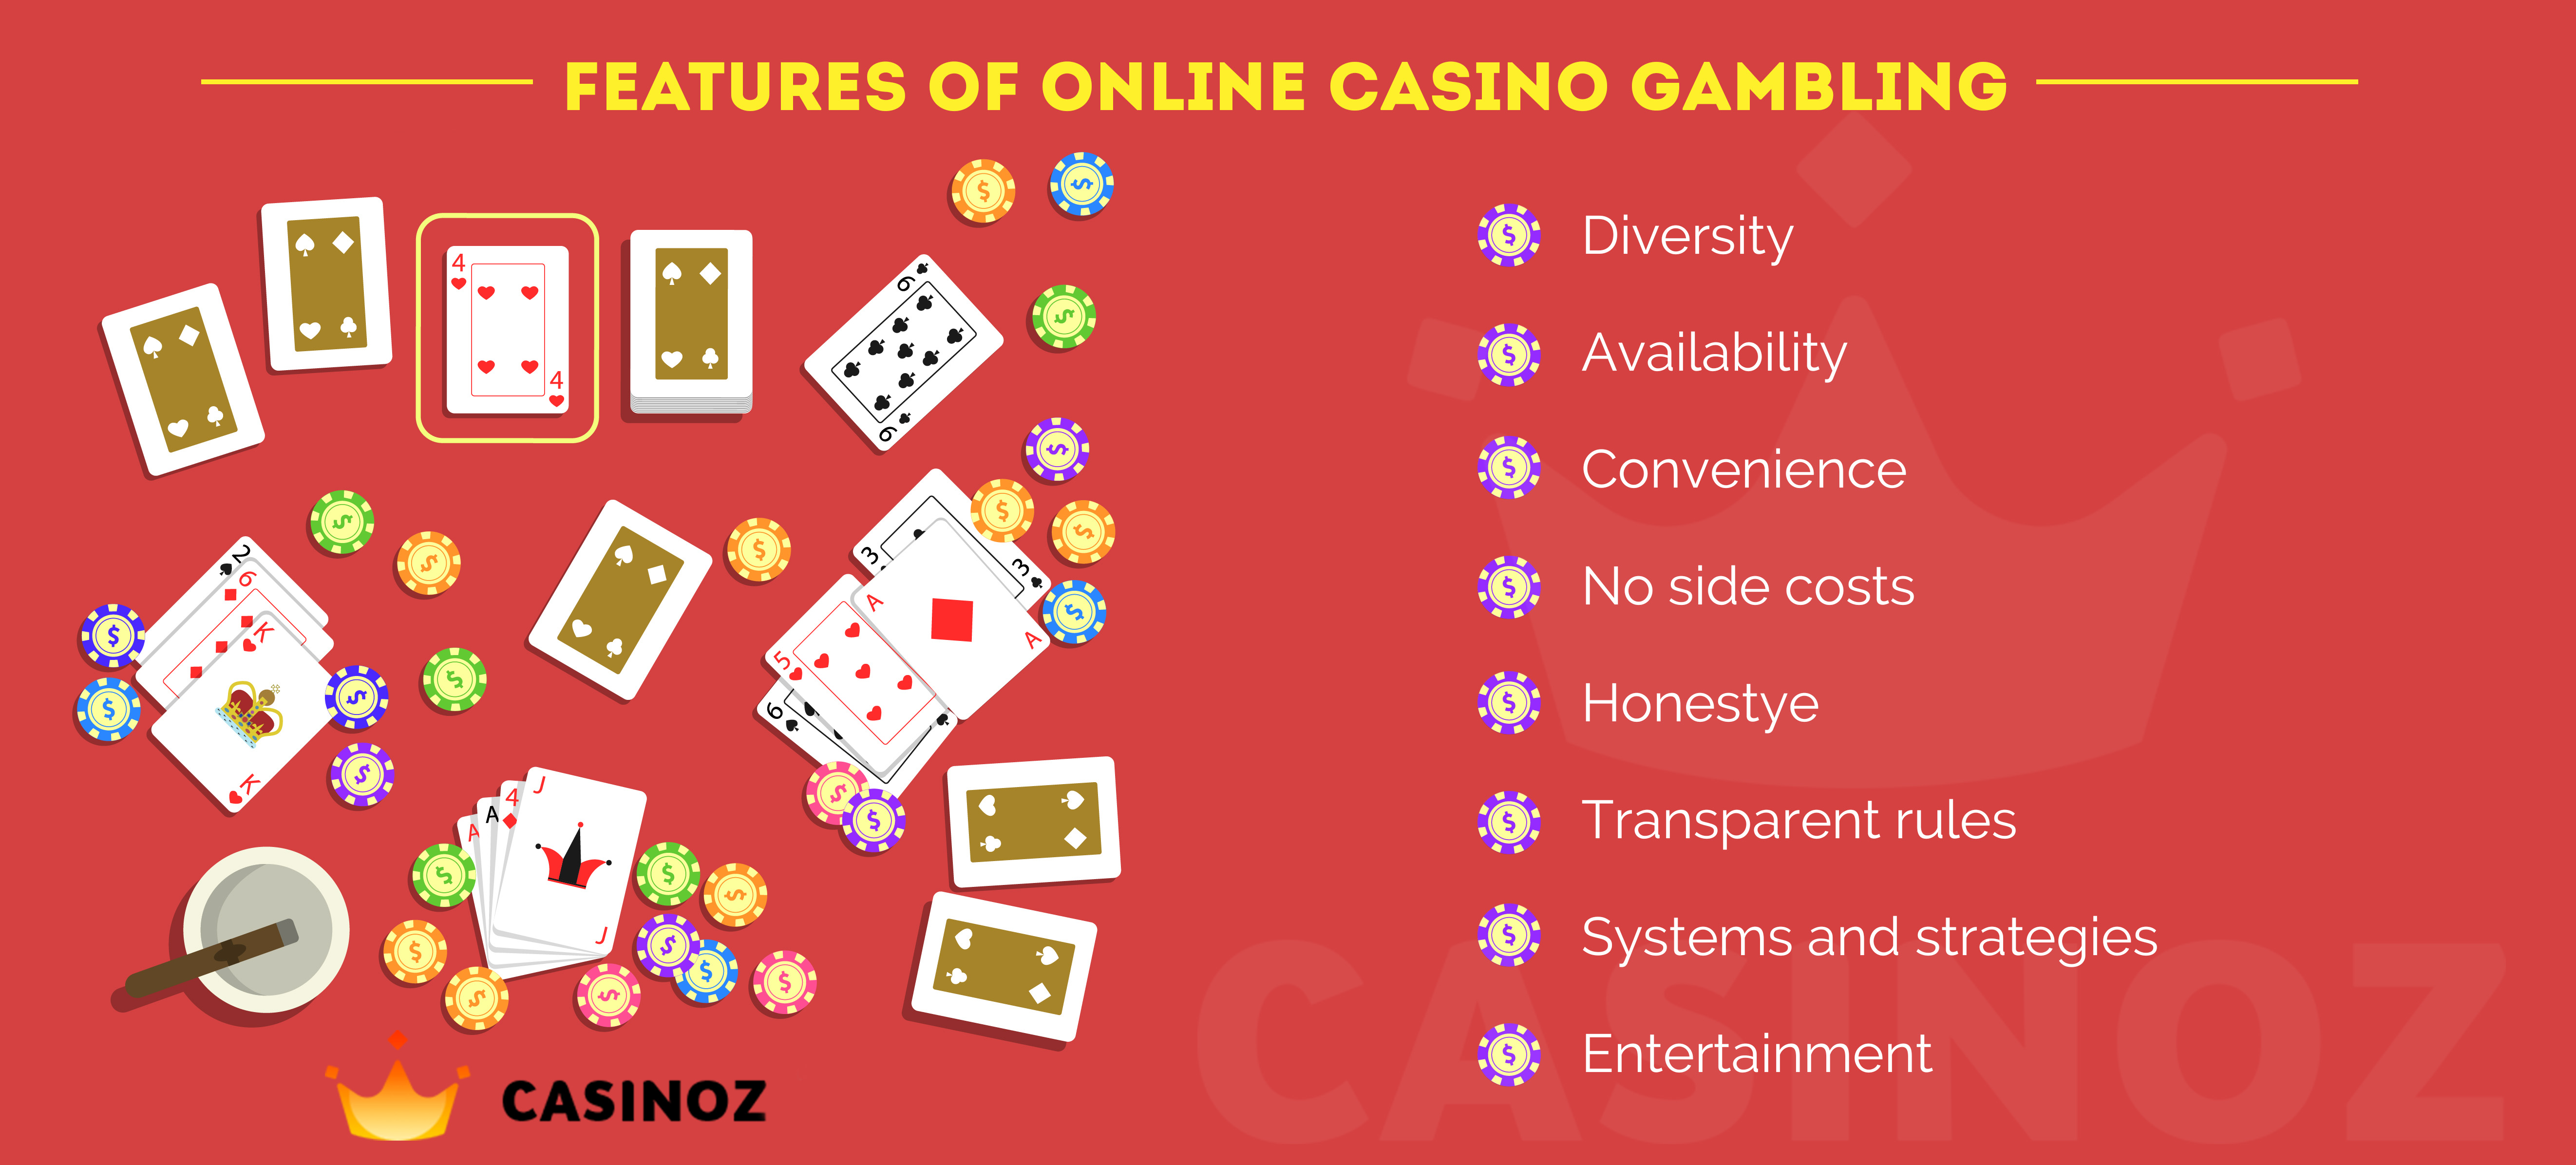 free casino table games for fun